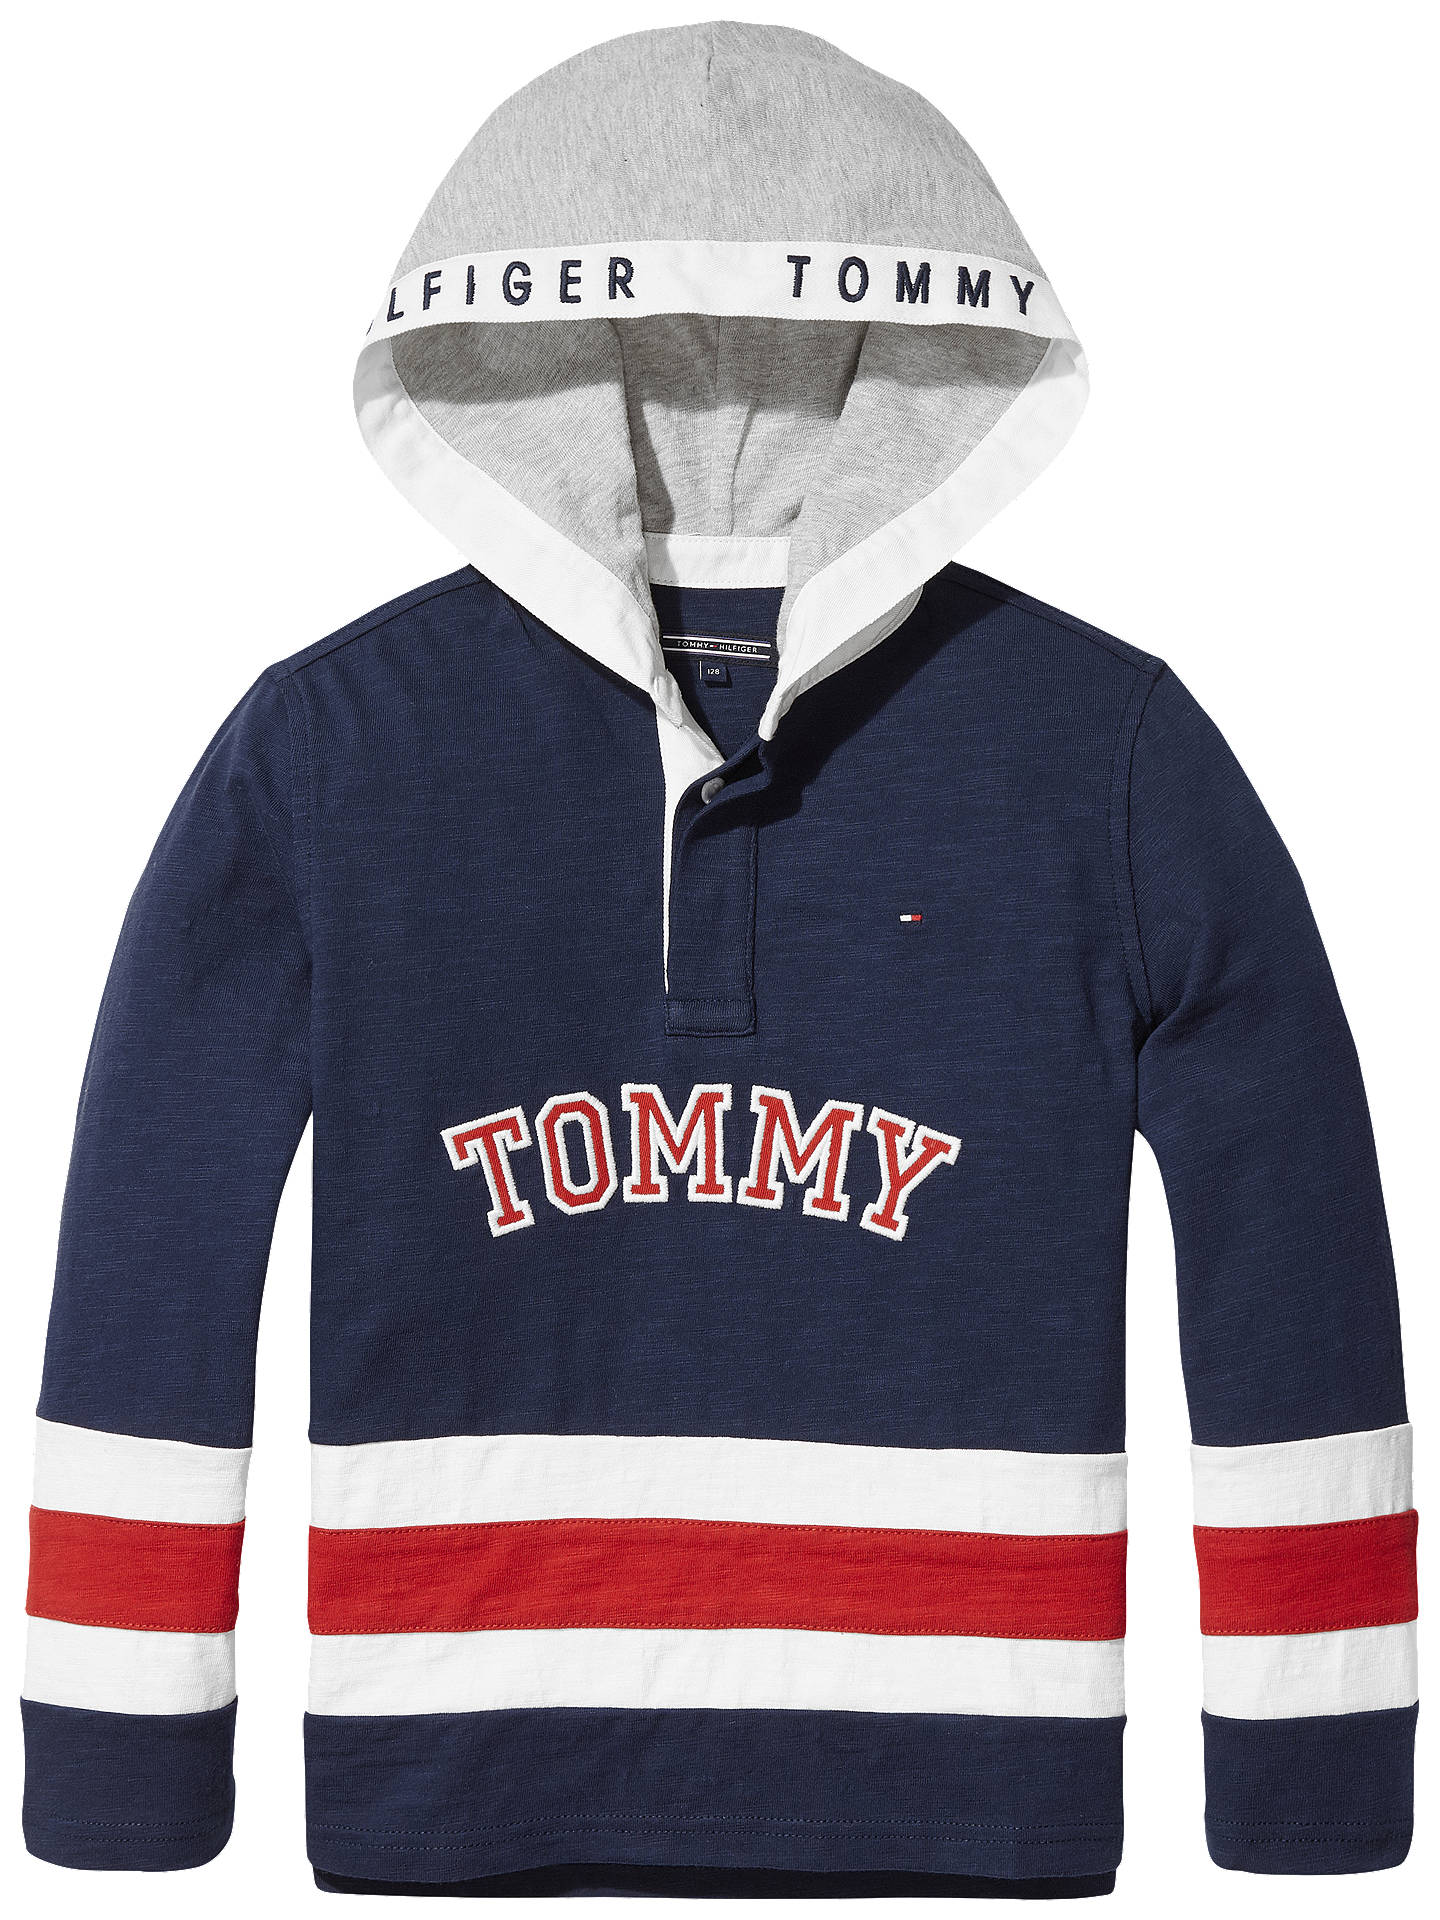 Tommy Hilfiger Boys' Hooded Rugby Top, Blue at John Lewis & Partners